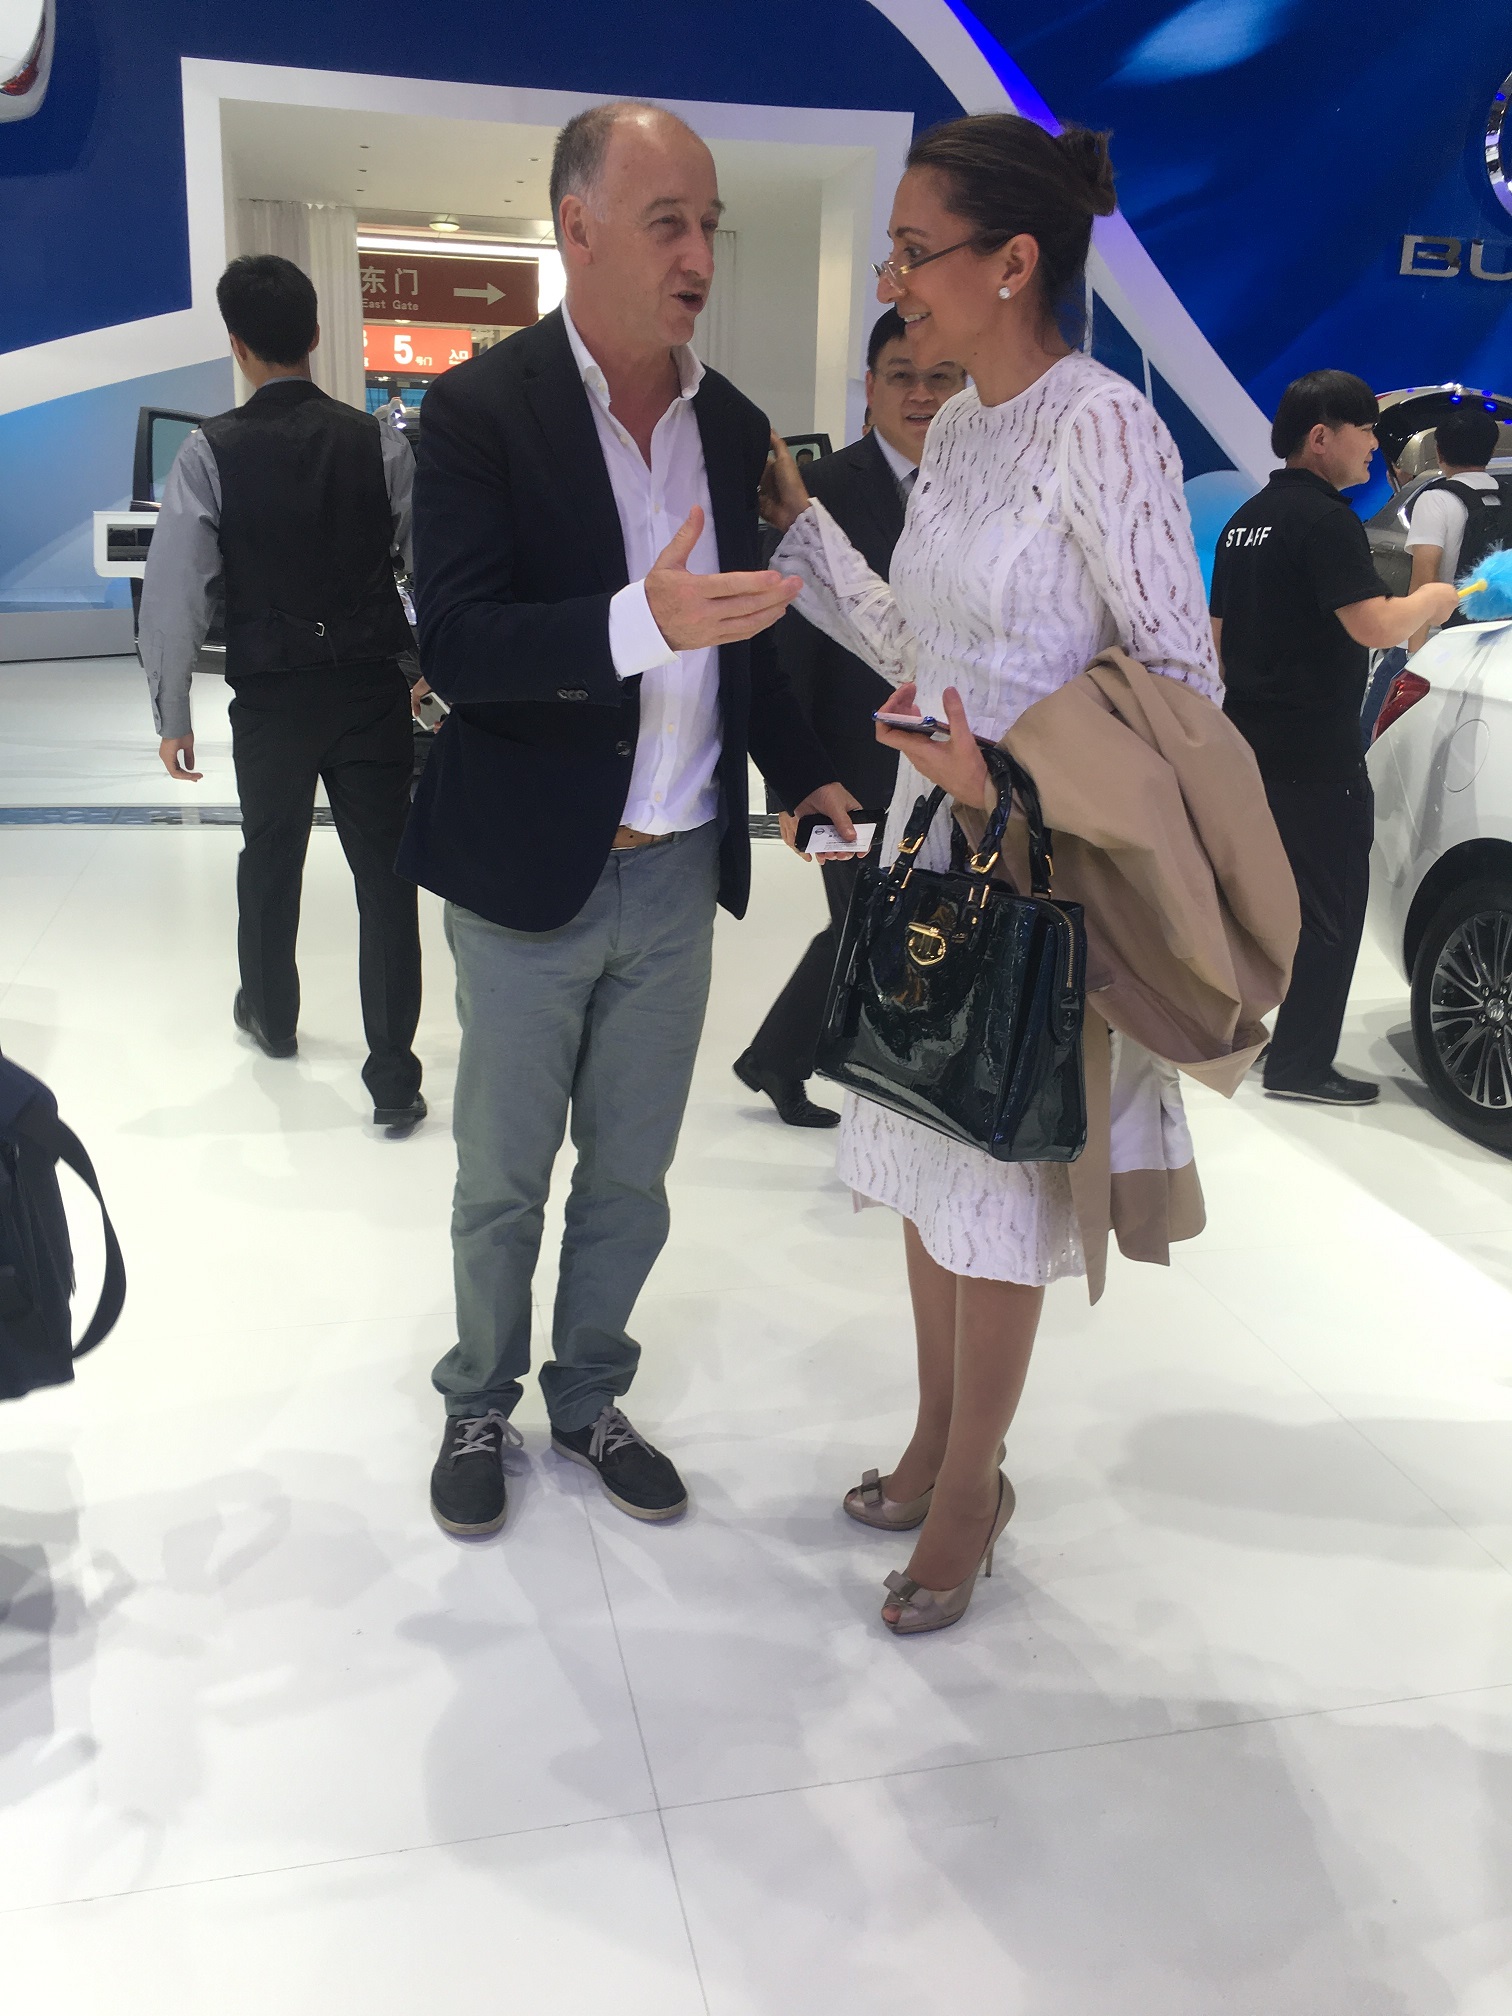 Kevin Wale, previous President and Managing Director of General Motors China and LIASE Group Managing Director Vanessa Moriel discuss on the sidelines of the 2016 China Auto Show in Beijing.